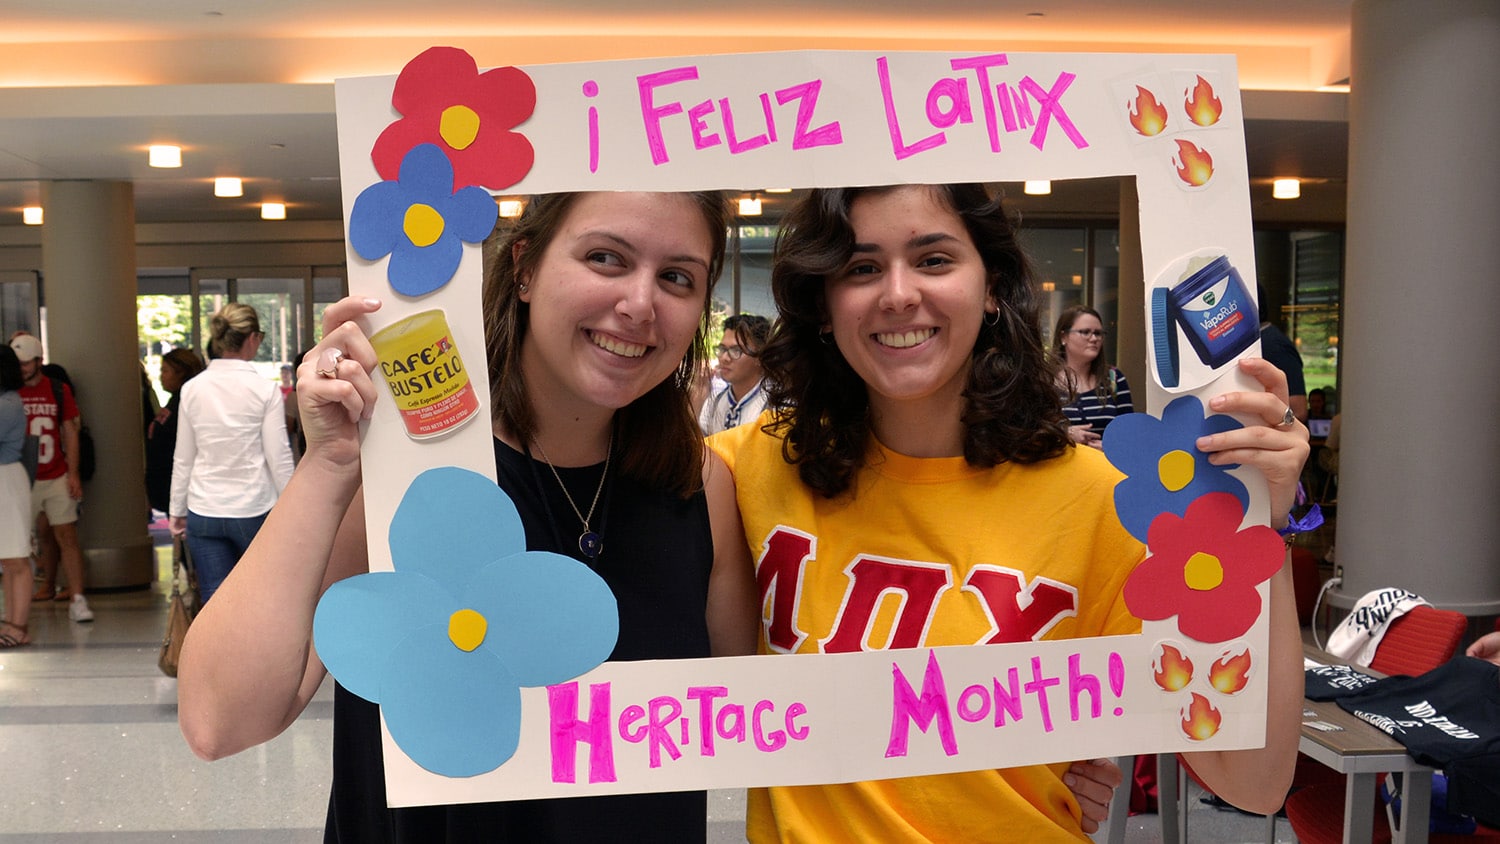 Two NC State students smile in the frame of a cardboard sign that reads "Feliz Latinx Heritage Month."